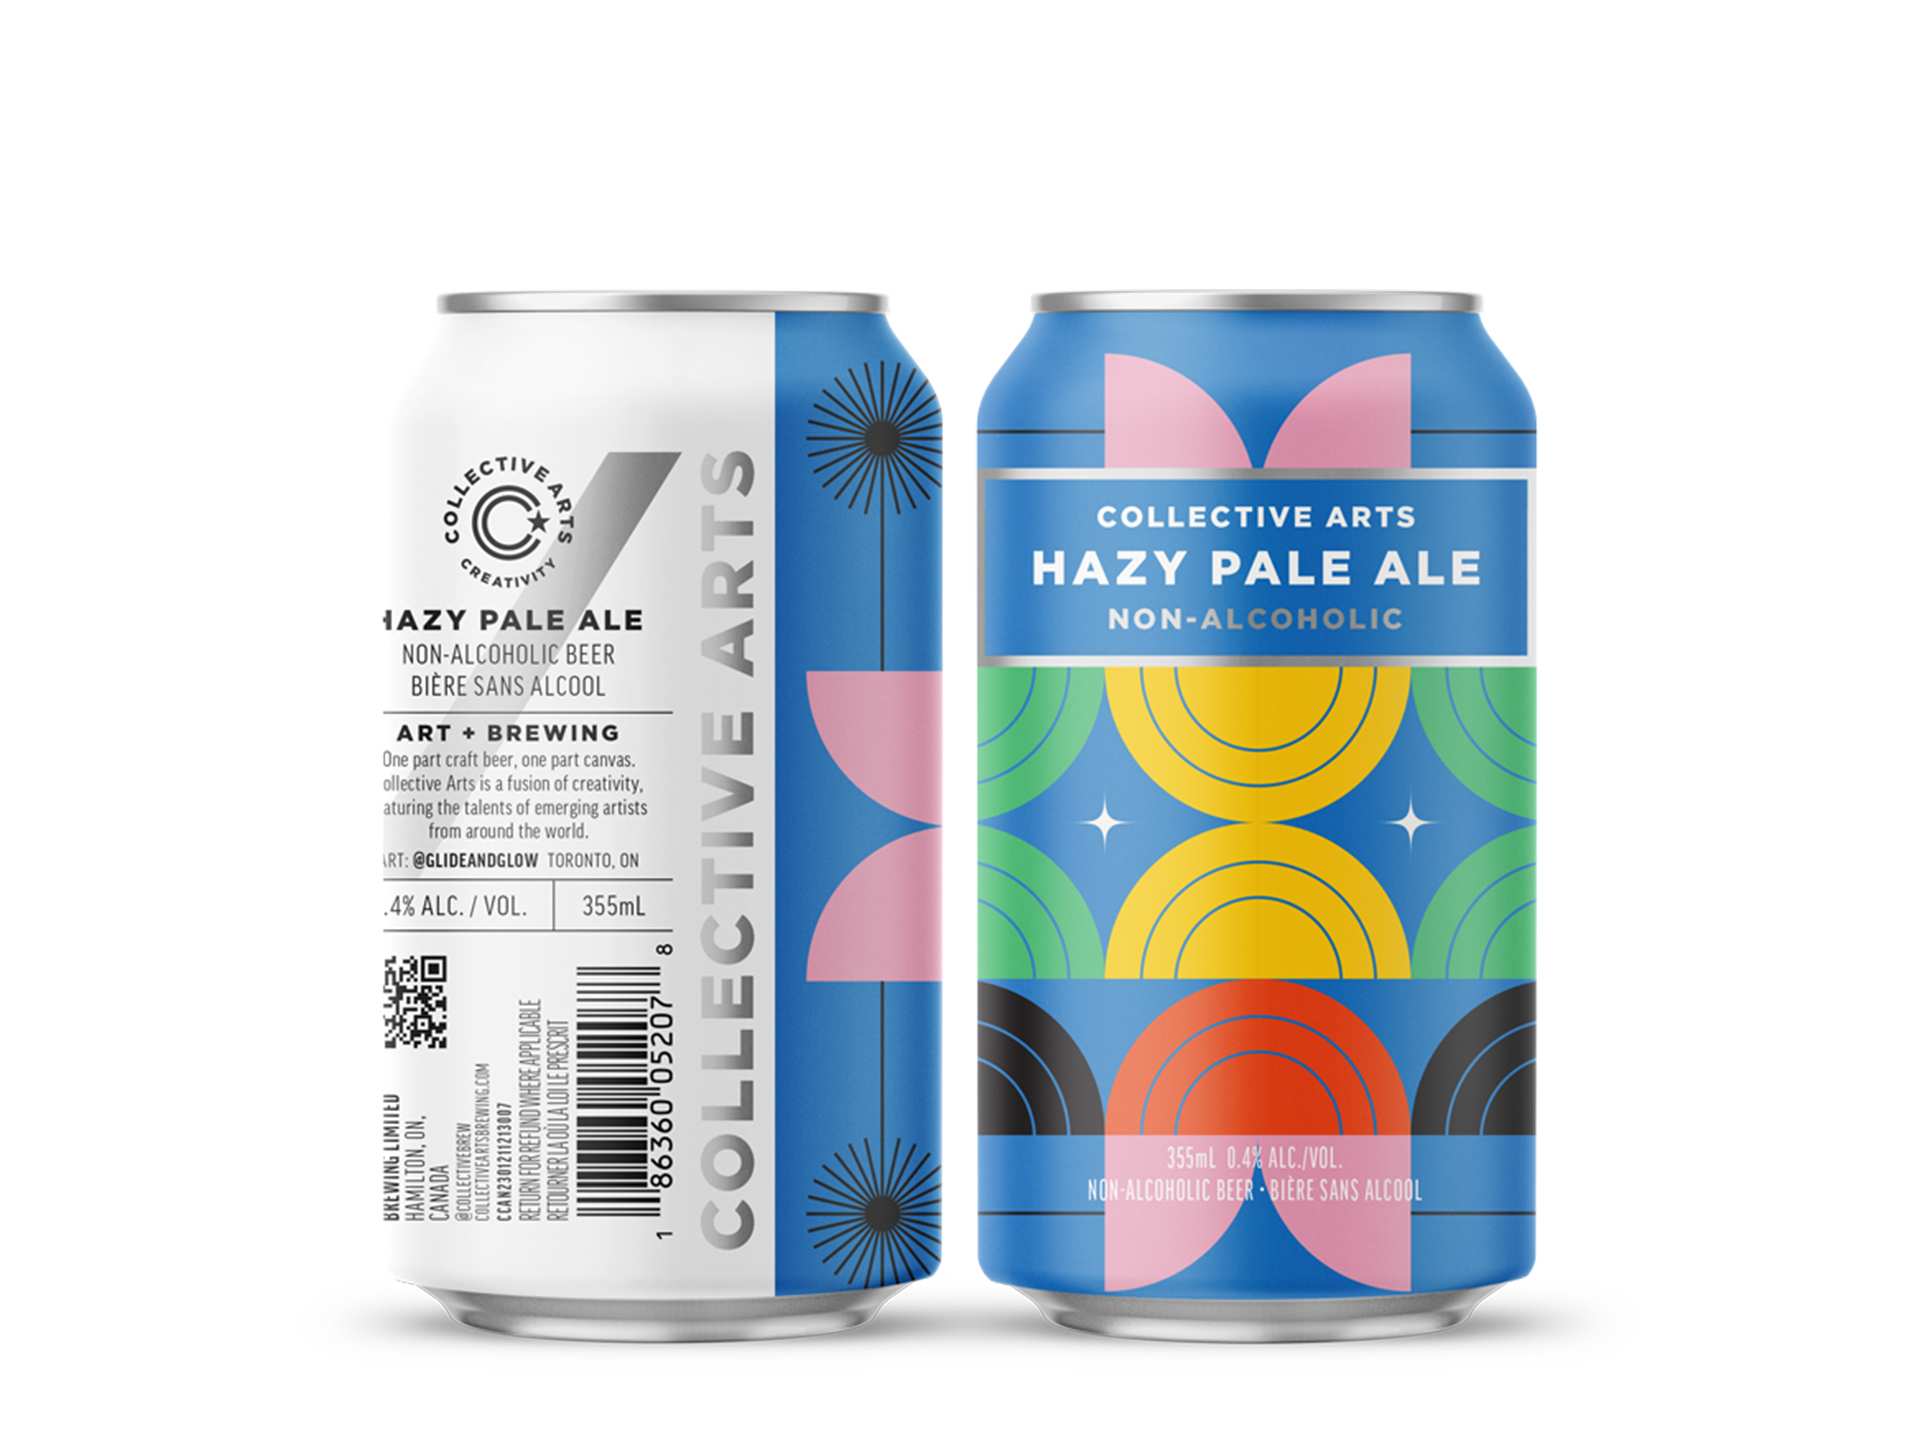 Non-alcoholic wine and non-alcoholic beer | Collective Arts non-alcoholic Hazy pale ale